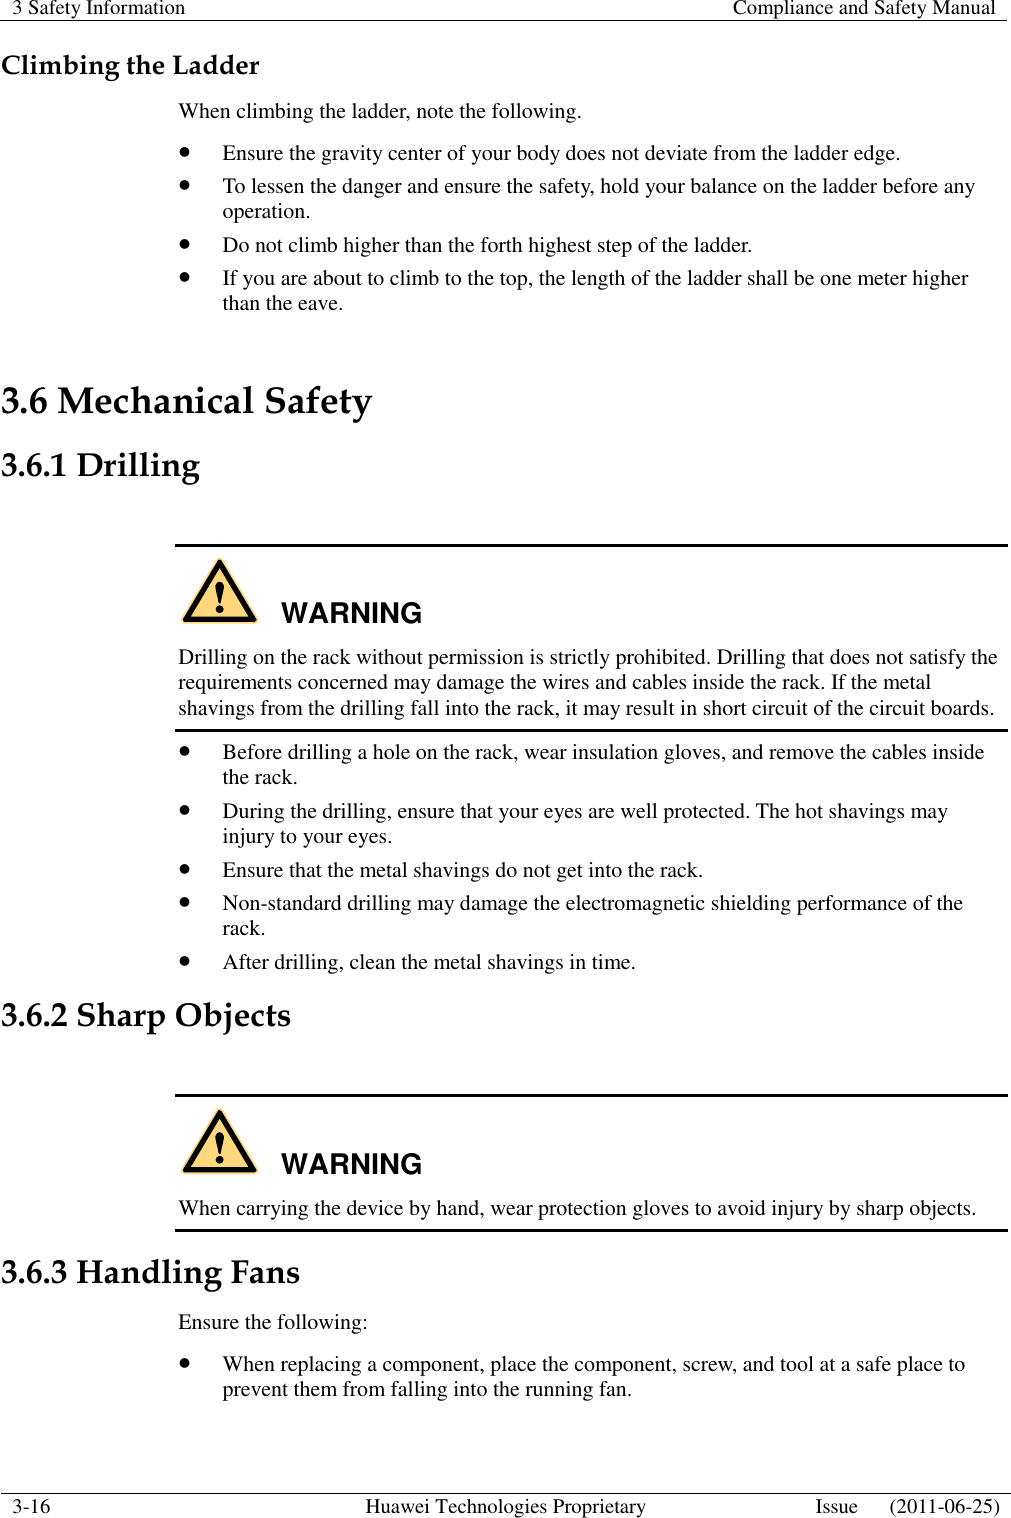 3 Safety Information    Compliance and Safety Manual  3-16 Huawei Technologies Proprietary Issue      (2011-06-25)  Climbing the Ladder When climbing the ladder, note the following.  Ensure the gravity center of your body does not deviate from the ladder edge.  To lessen the danger and ensure the safety, hold your balance on the ladder before any operation.  Do not climb higher than the forth highest step of the ladder.  If you are about to climb to the top, the length of the ladder shall be one meter higher than the eave. 3.6 Mechanical Safety 3.6.1 Drilling  WARNING Drilling on the rack without permission is strictly prohibited. Drilling that does not satisfy the requirements concerned may damage the wires and cables inside the rack. If the metal shavings from the drilling fall into the rack, it may result in short circuit of the circuit boards.  Before drilling a hole on the rack, wear insulation gloves, and remove the cables inside the rack.  During the drilling, ensure that your eyes are well protected. The hot shavings may injury to your eyes.  Ensure that the metal shavings do not get into the rack.  Non-standard drilling may damage the electromagnetic shielding performance of the rack.  After drilling, clean the metal shavings in time. 3.6.2 Sharp Objects  WARNING When carrying the device by hand, wear protection gloves to avoid injury by sharp objects. 3.6.3 Handling Fans Ensure the following:  When replacing a component, place the component, screw, and tool at a safe place to prevent them from falling into the running fan. 